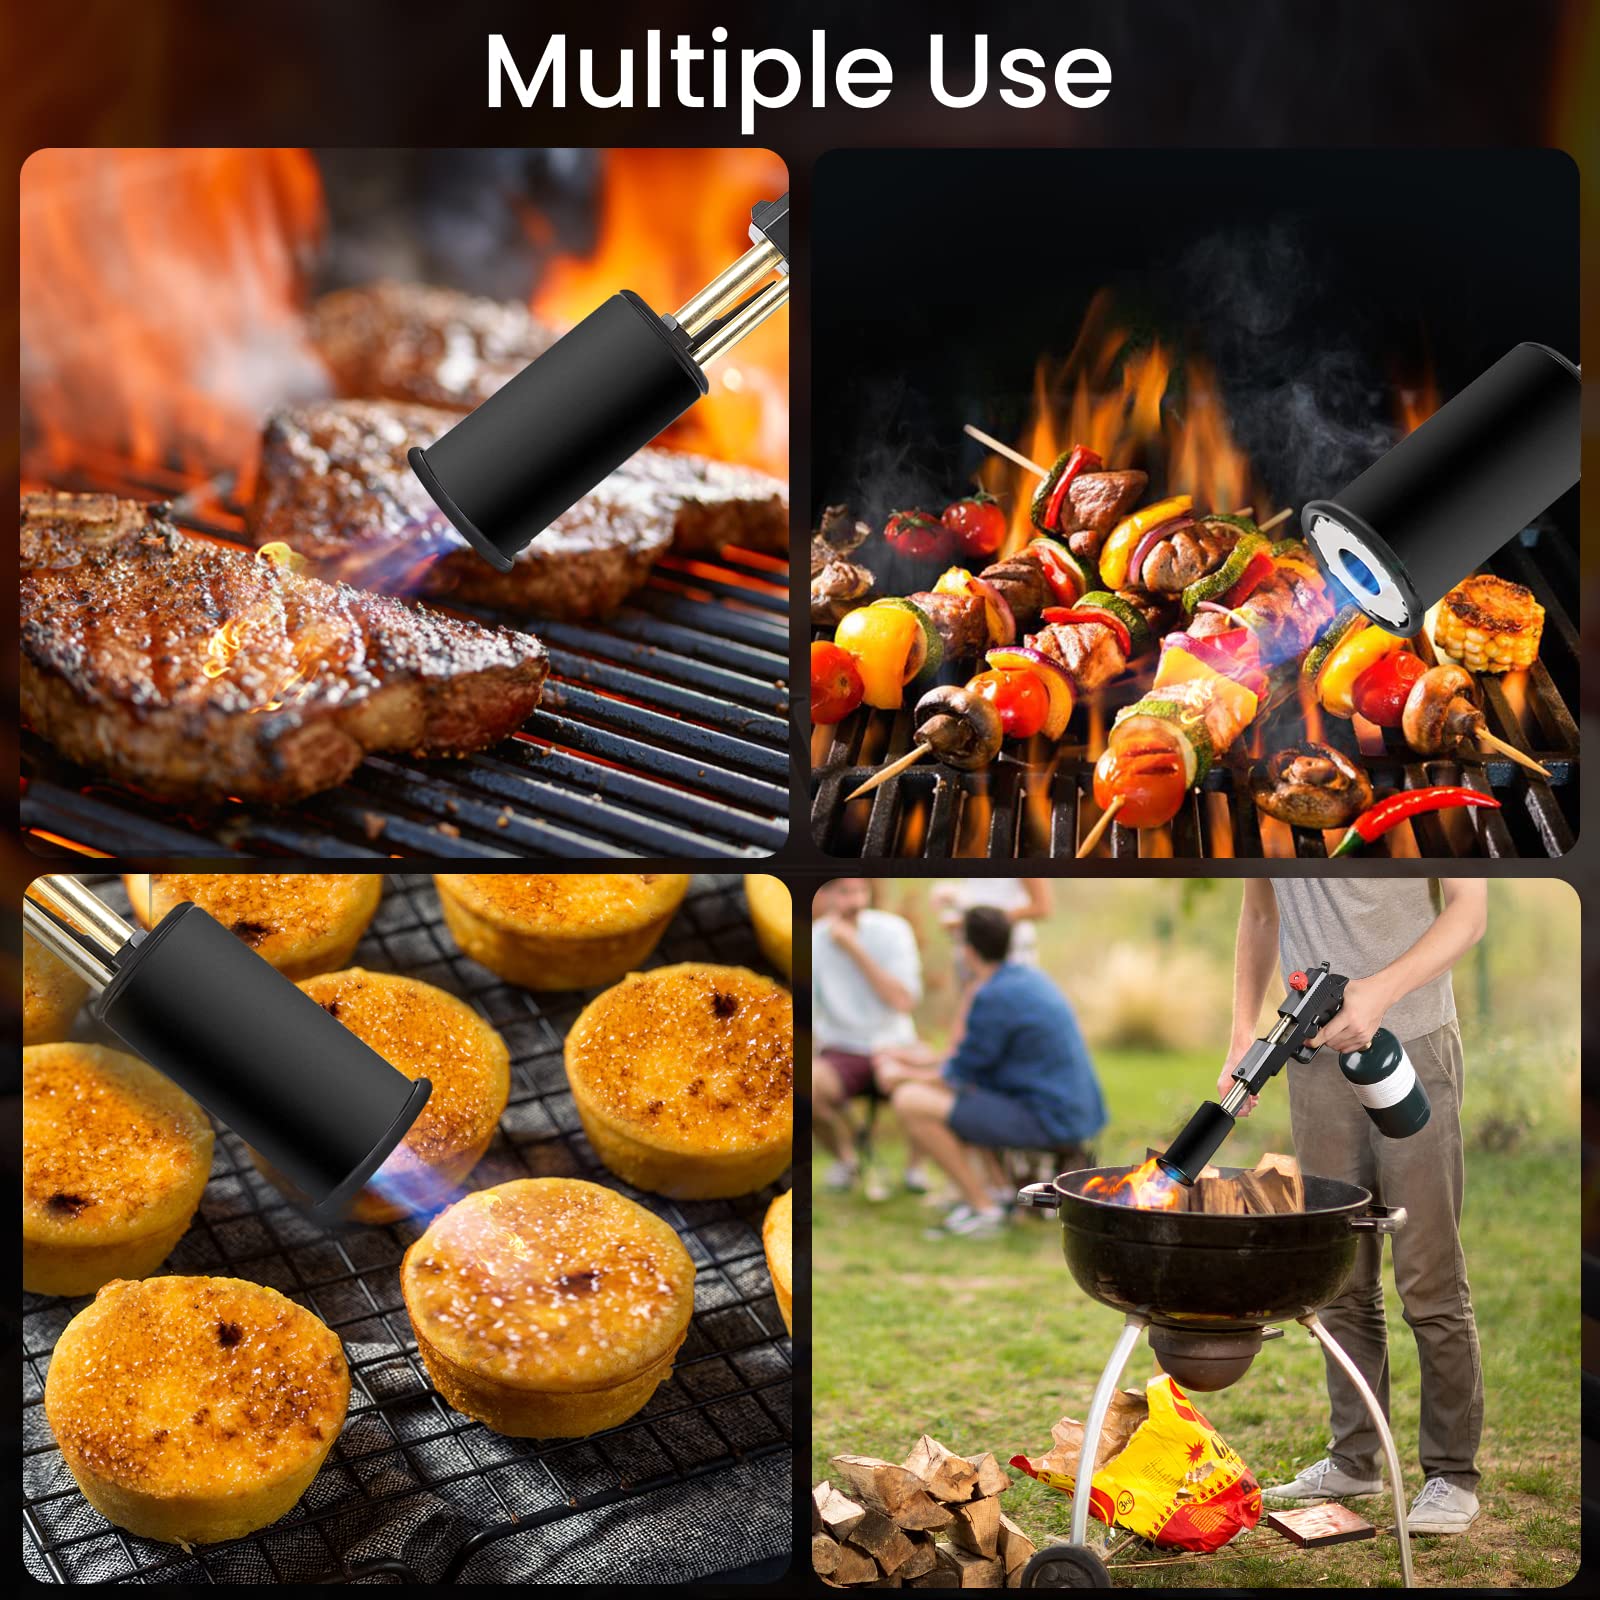 POWERFUL Cooking Propane Torch, Grill Gun Torch, Flame Thrower Fire Gun,Kitchen Culinary Torch with Safety Lock,Handheld Blow Torch,Campfire Starter,Grilling and BBQ Tool for Steak & Creme Brulee